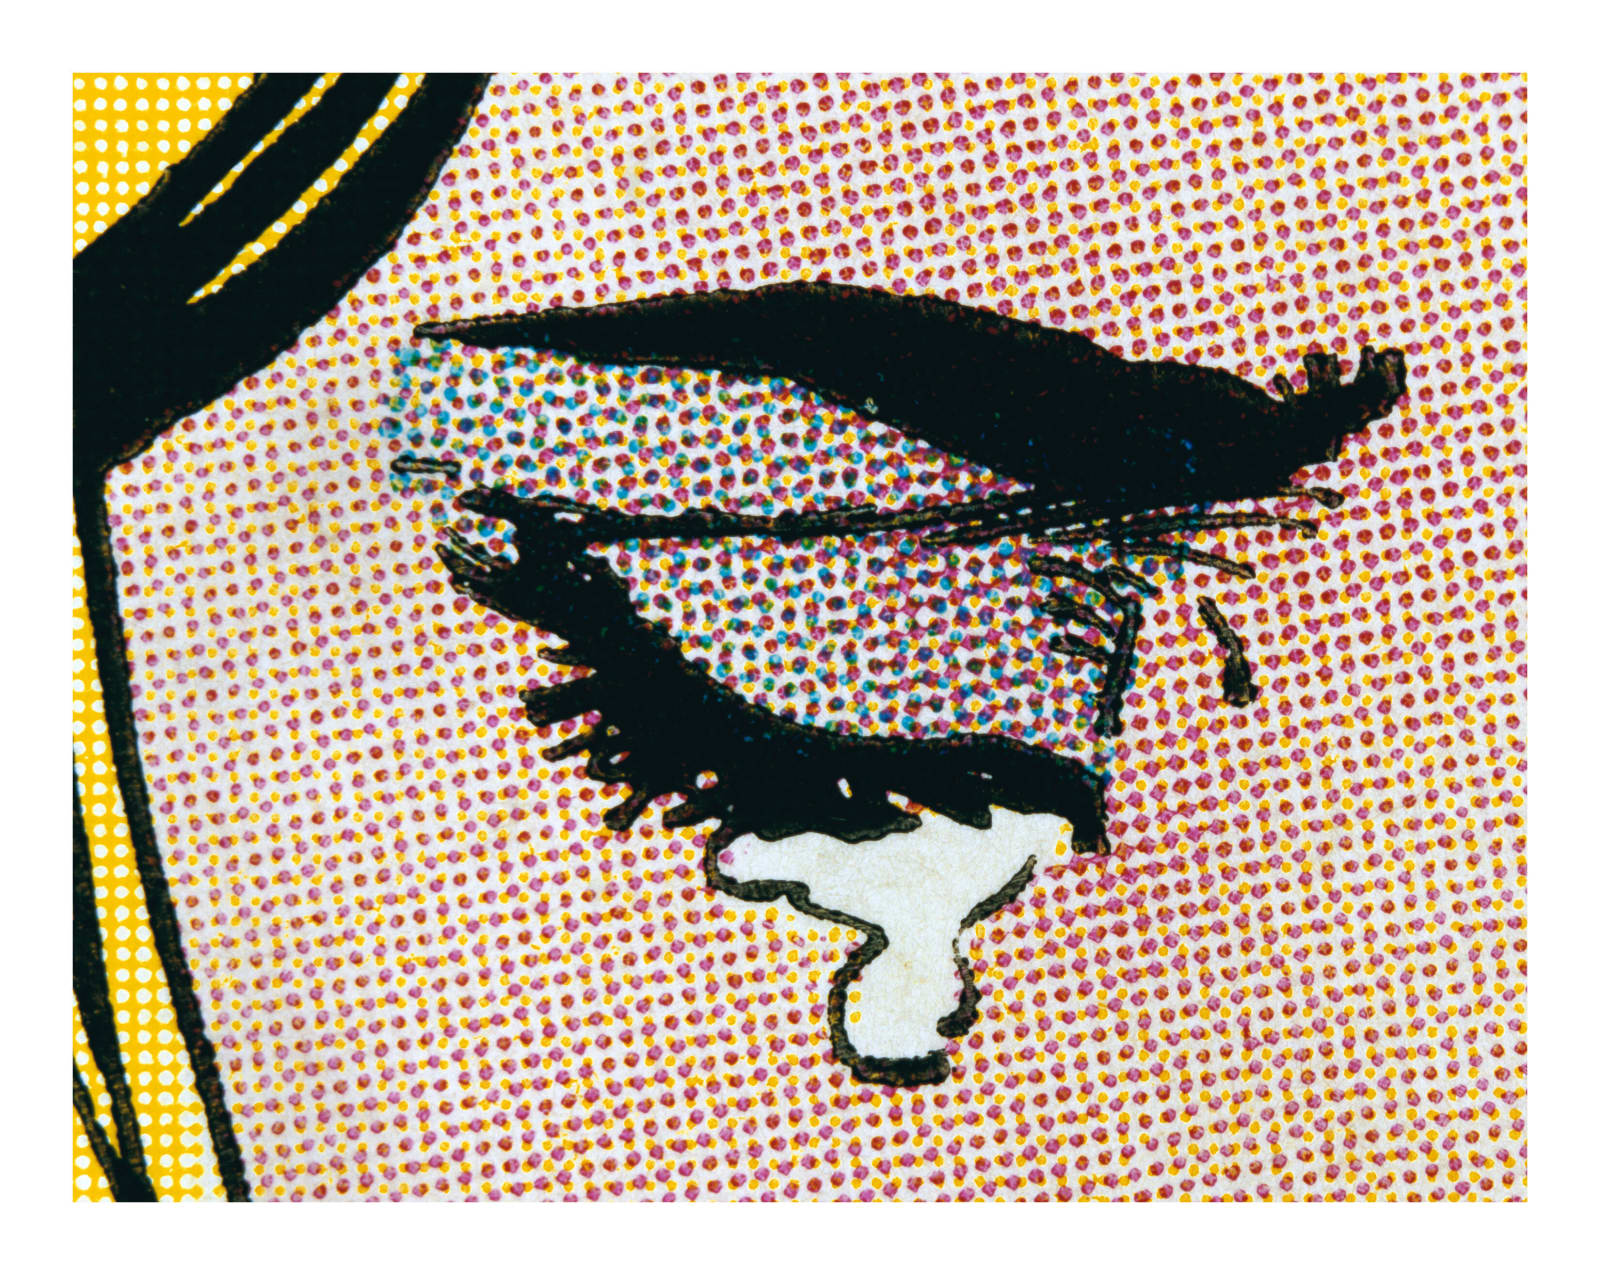 Anne Collier Woman Crying Comic 4 2018 Anton Kern Gallery